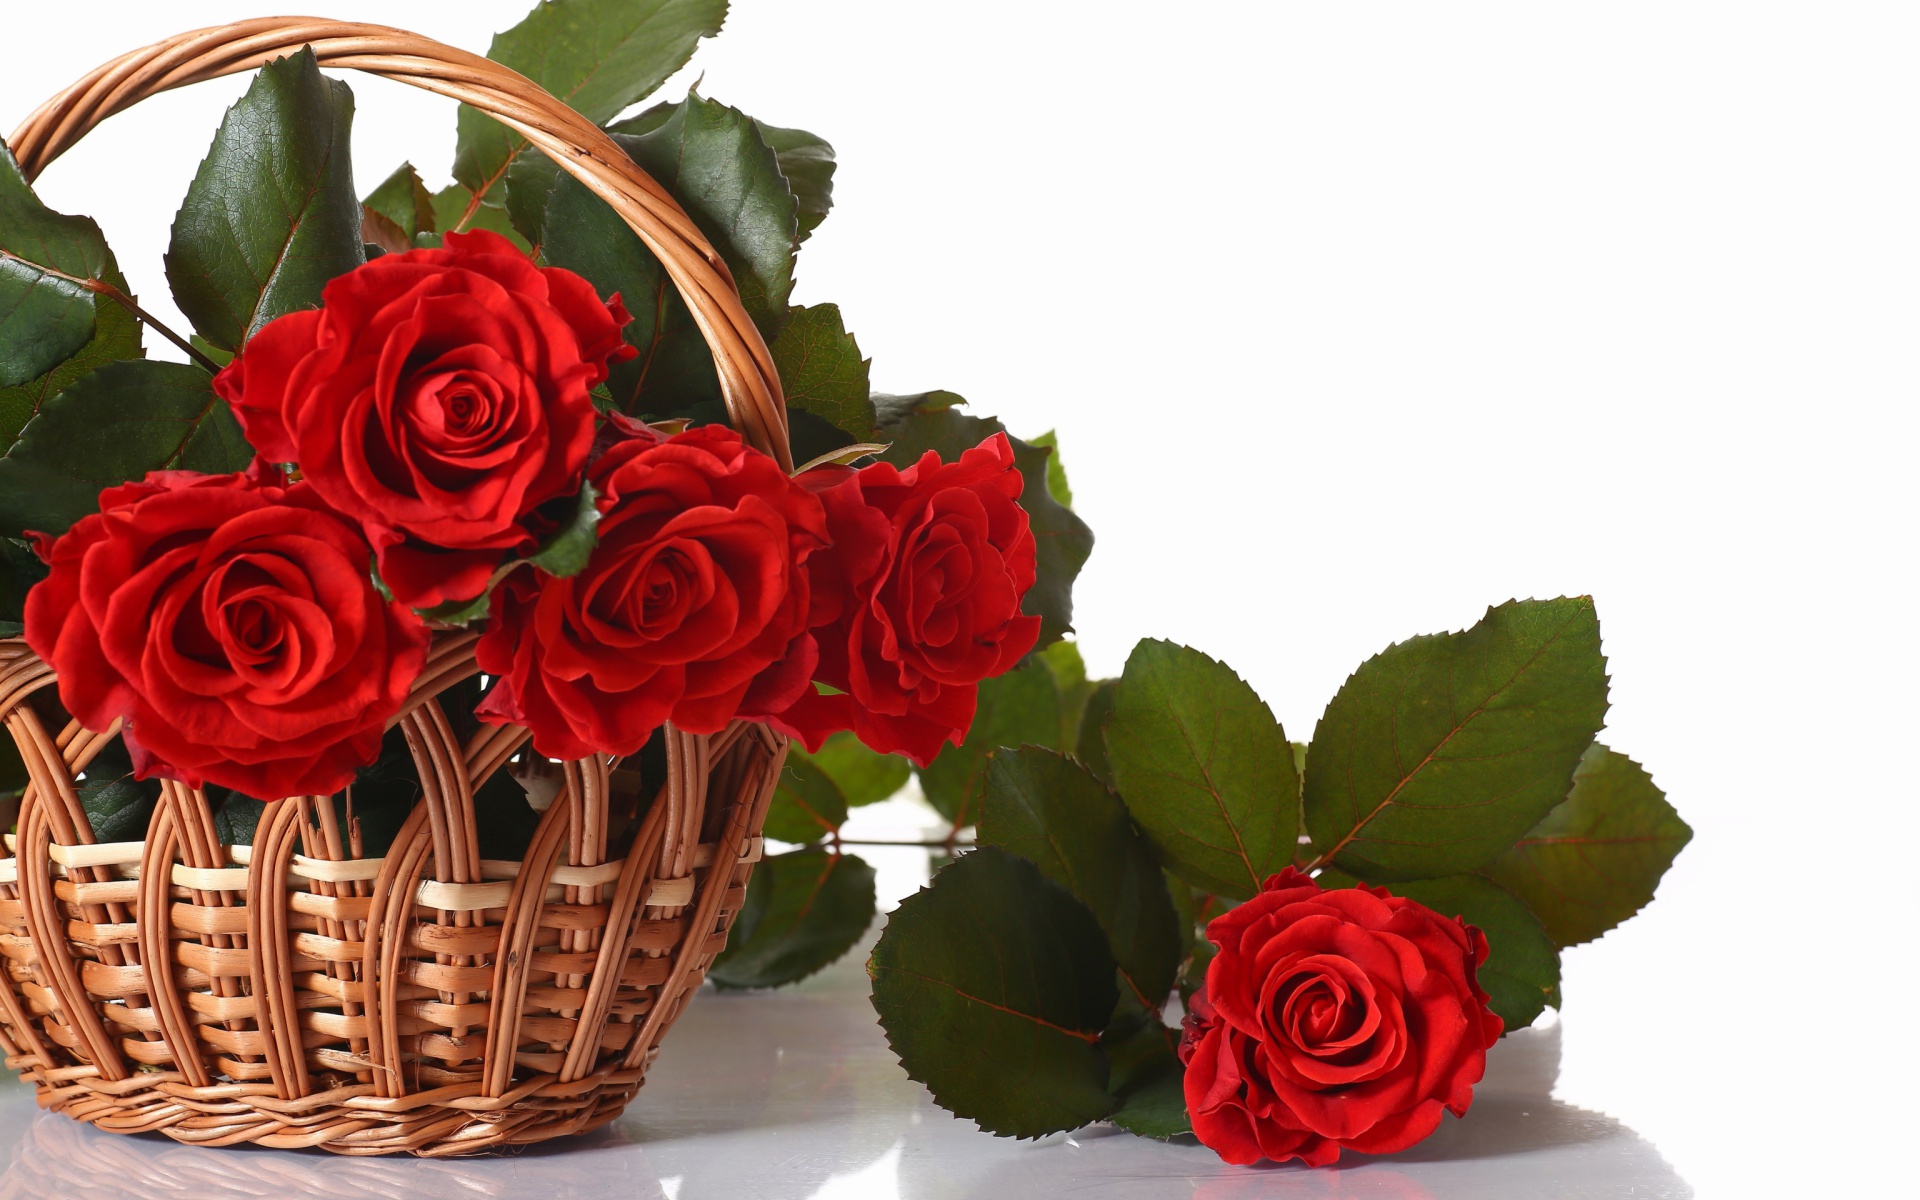 Das Basket with Roses Wallpaper 1920x1200